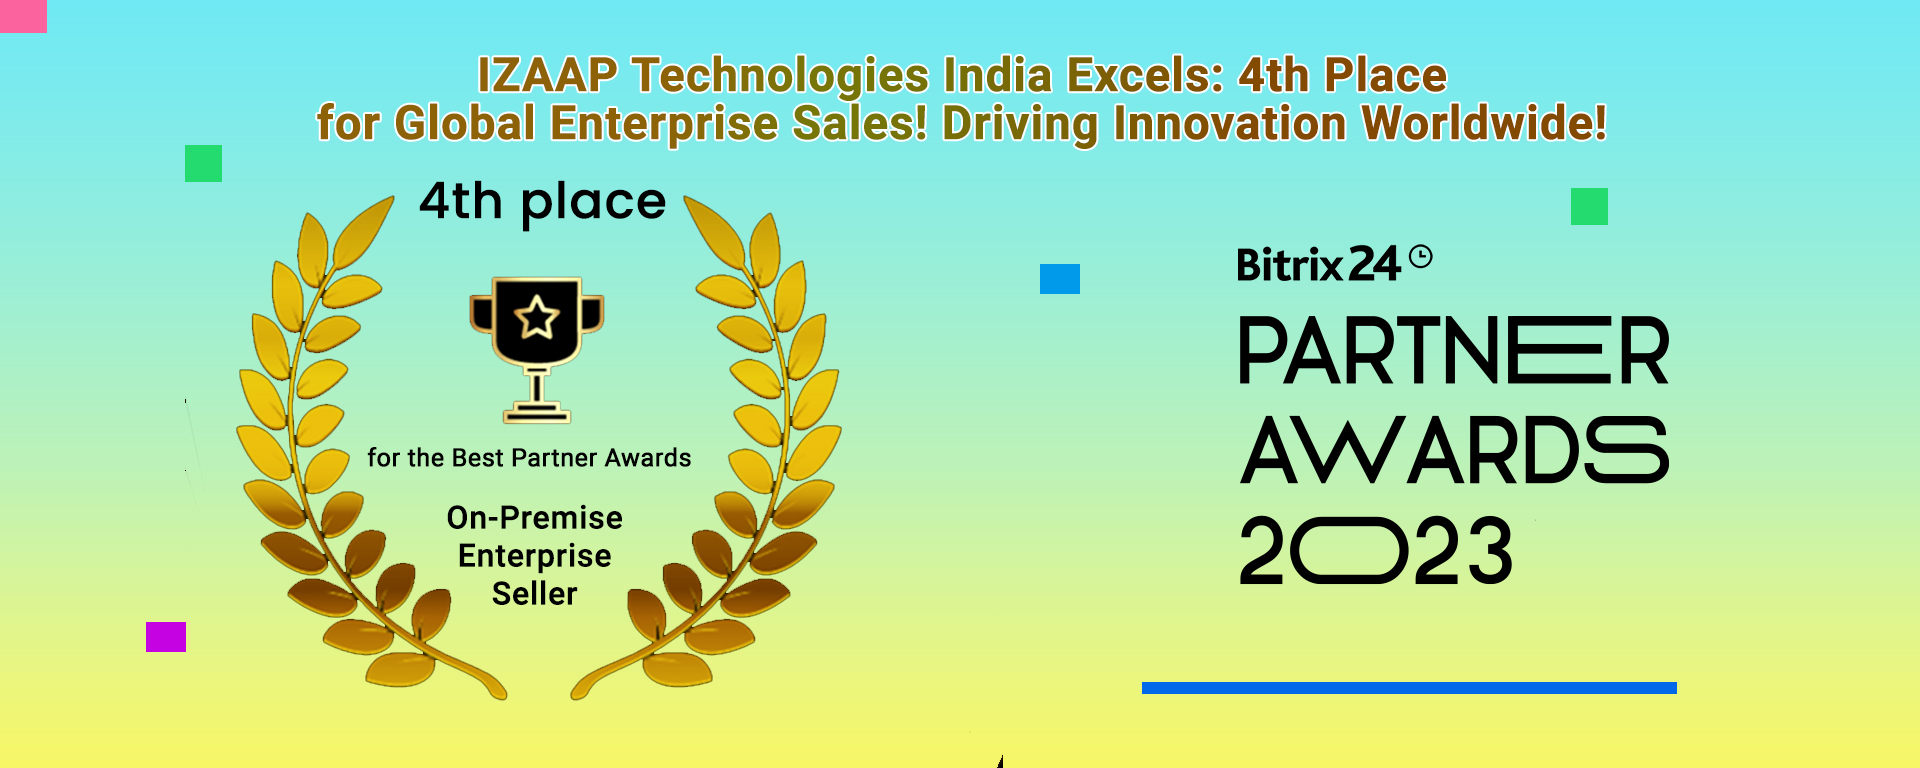 IZAAP Technologies India Excels: 4th Place for Global Enterprise Sales! Driving Innovation Worldwide! 
